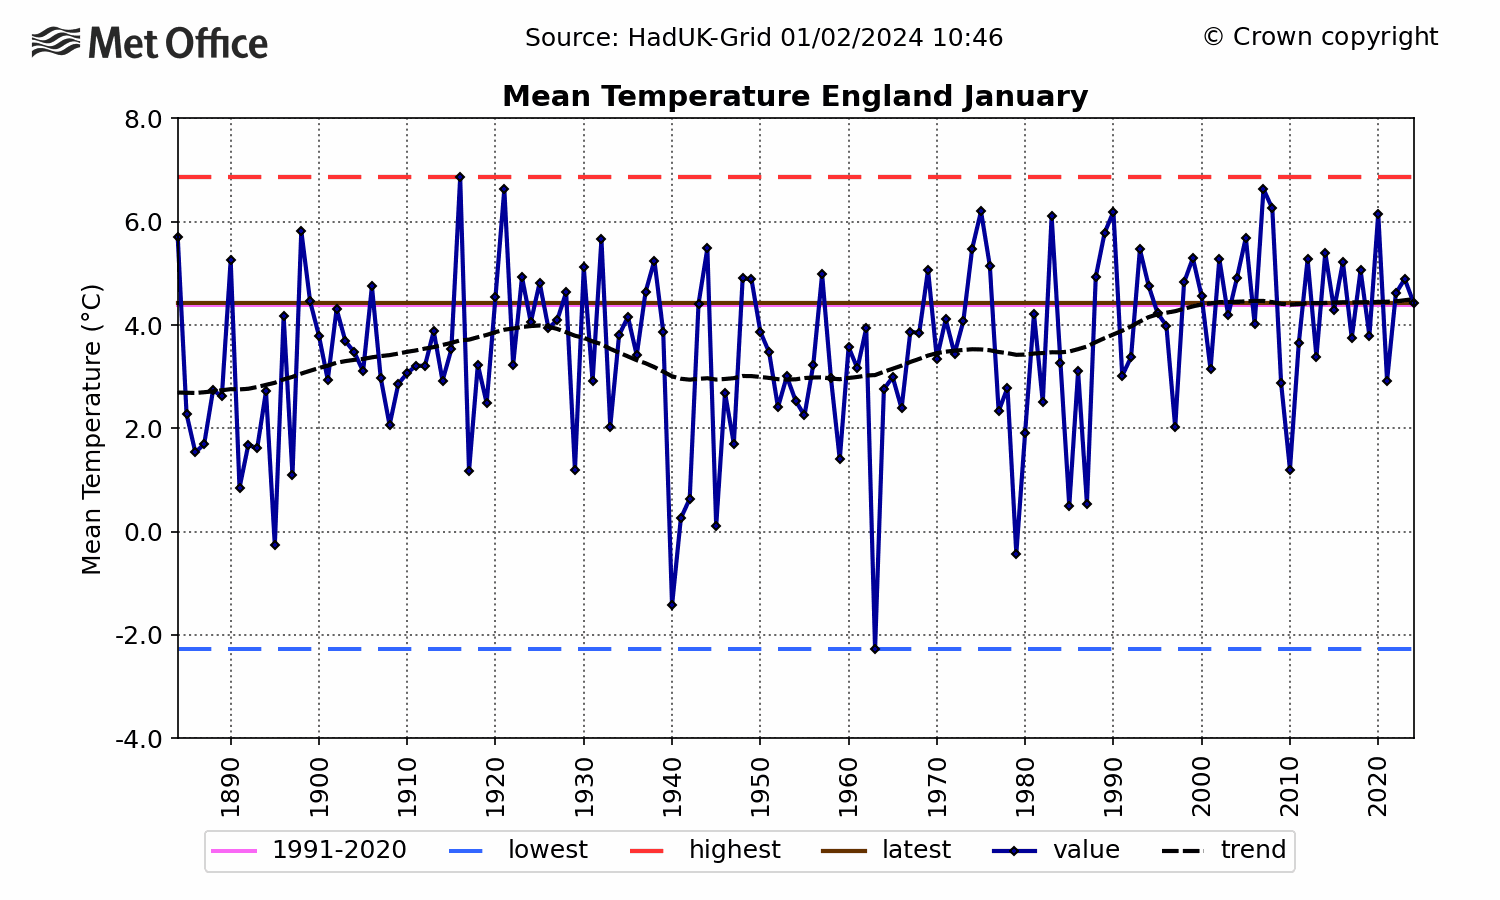 England Mean temperature - January